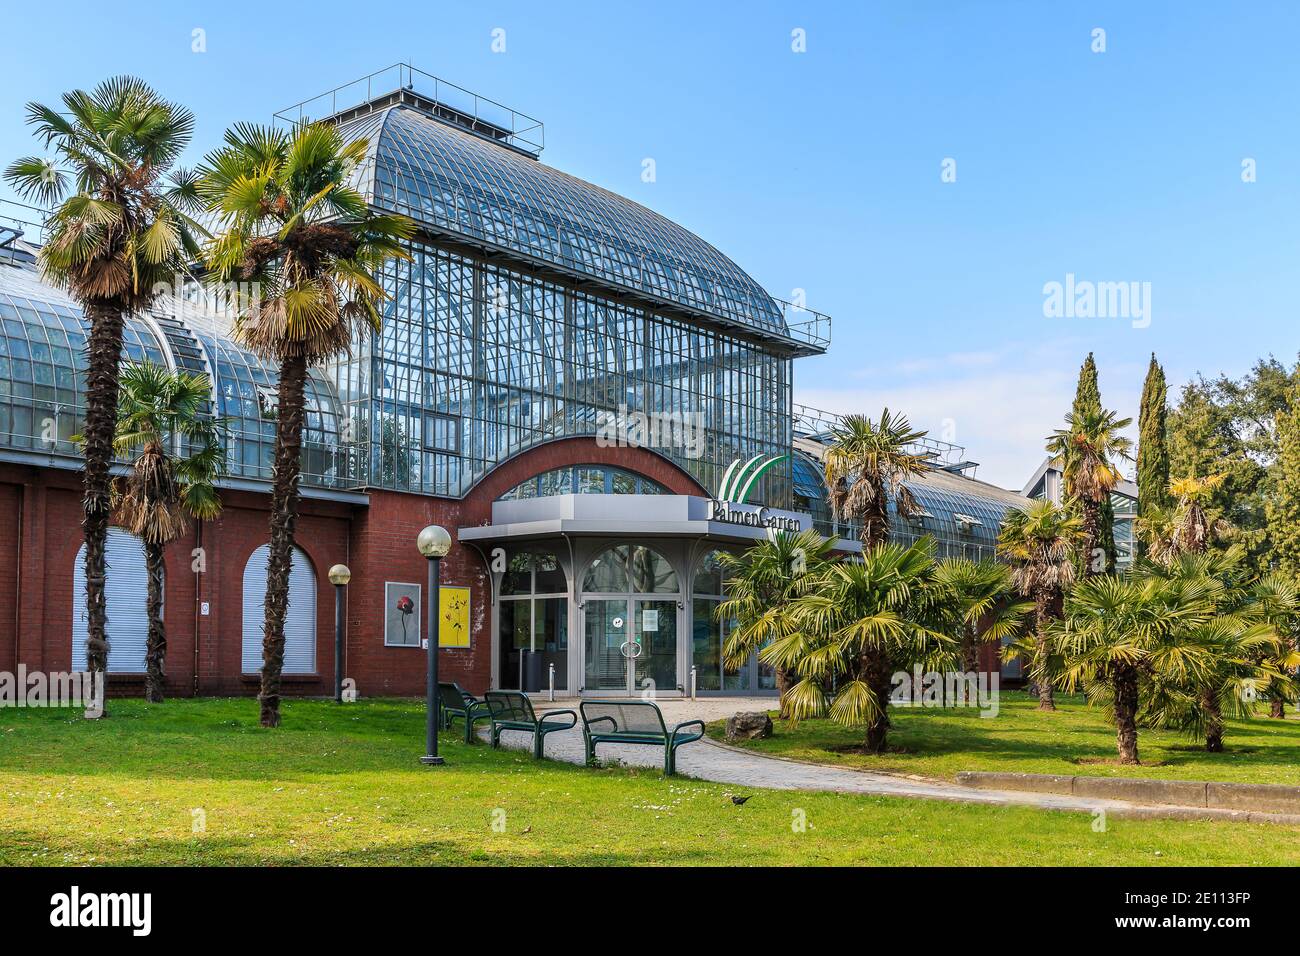 Buildings of palm garden in Frankfurt. Palm trees with meadow in front of the entrance. Glass roof with windows and bricks from the building. Path wit Stock Photo